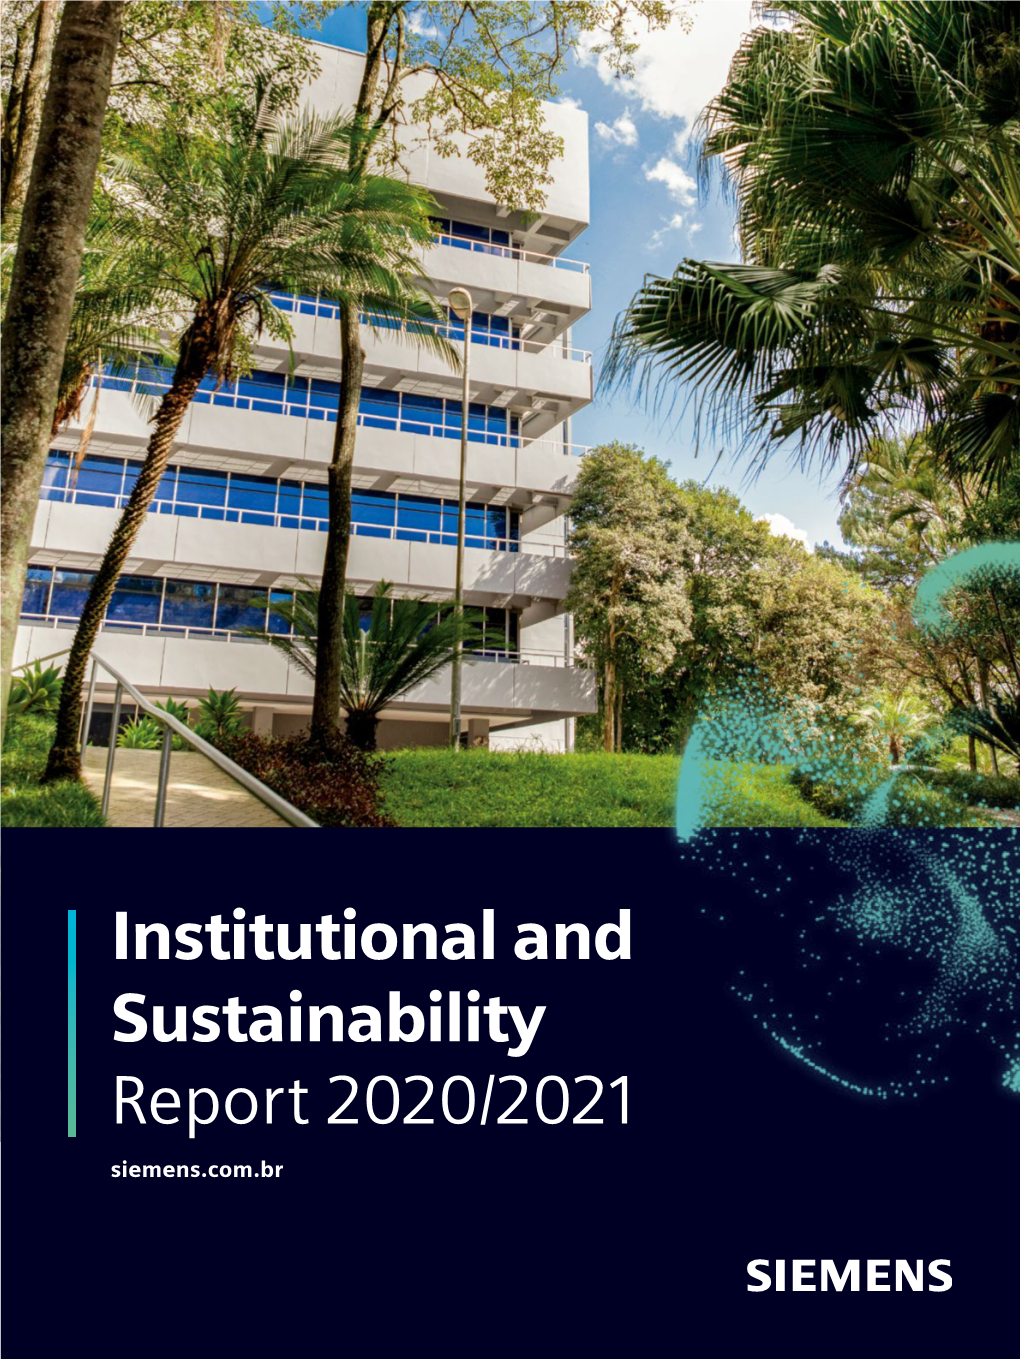 Institutional and Sustainability Report 2020/2021 Siemens.Com.Br Institutional and Sustainability Report | Siemens 2020/2021 Dear Reader